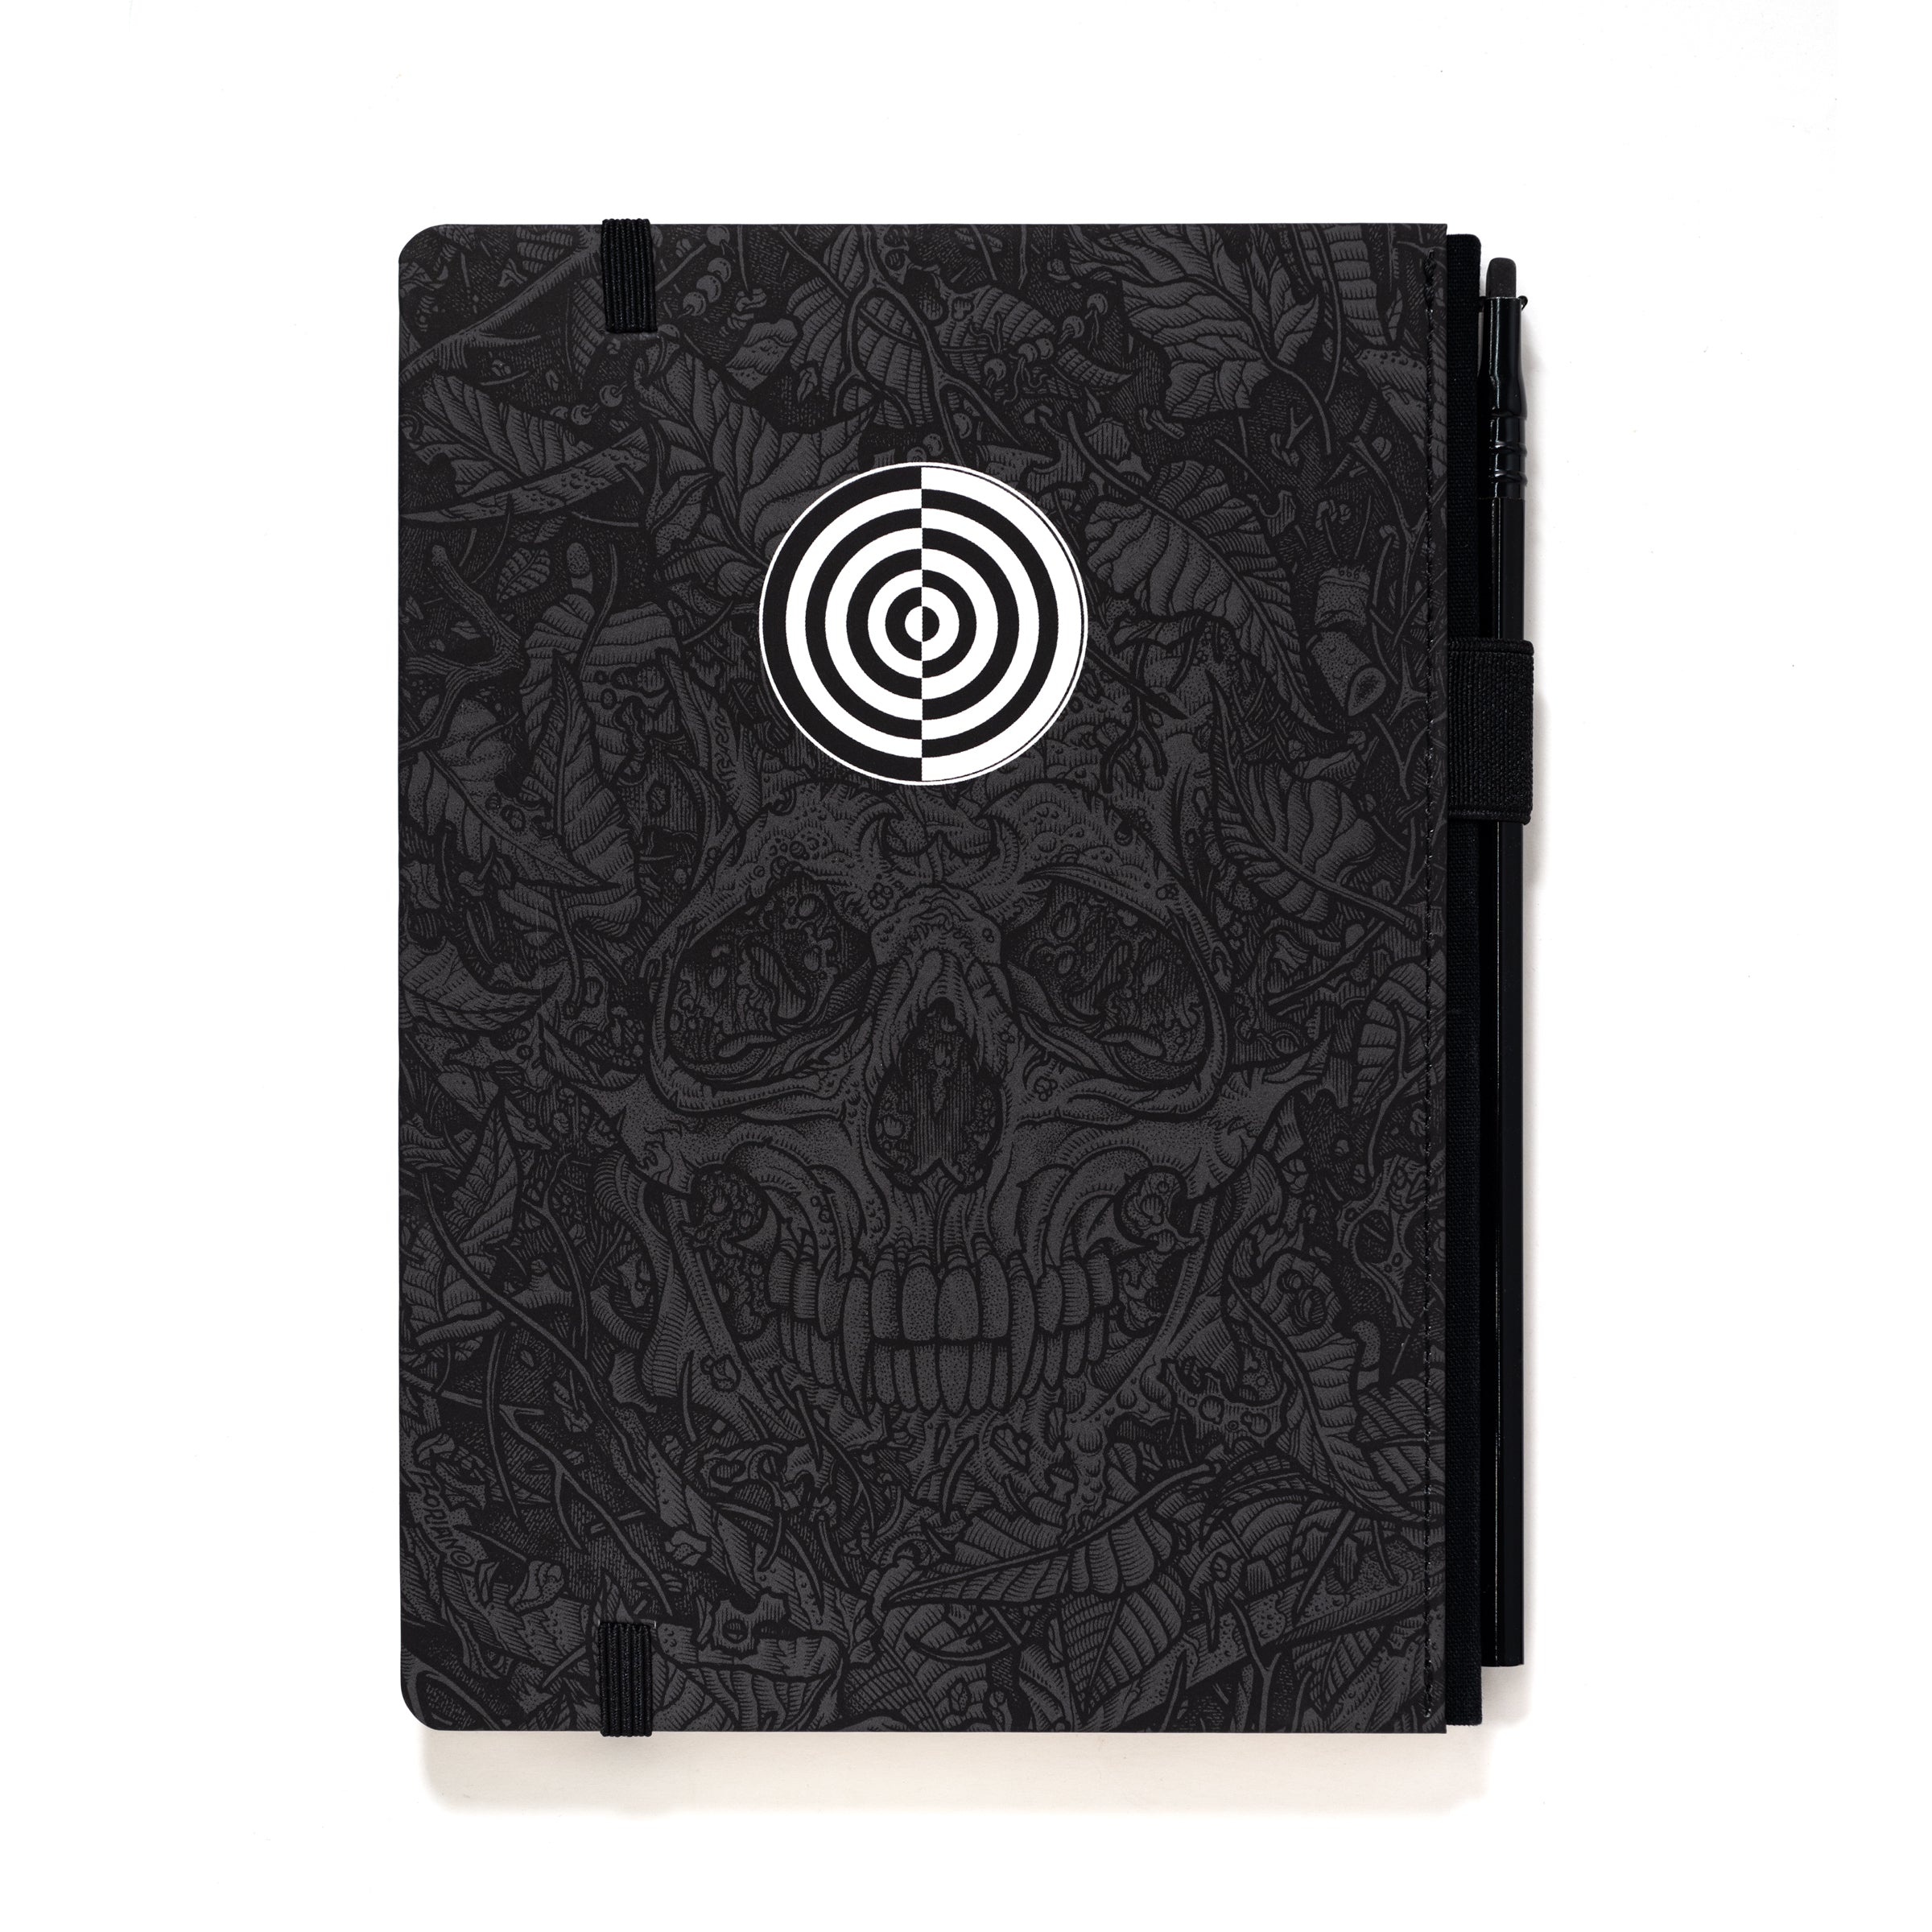 A Blackwing Artist Series Slate Notebook - Florian Bertmer with a skull design perfect for sketching with a Blackwing pencil.